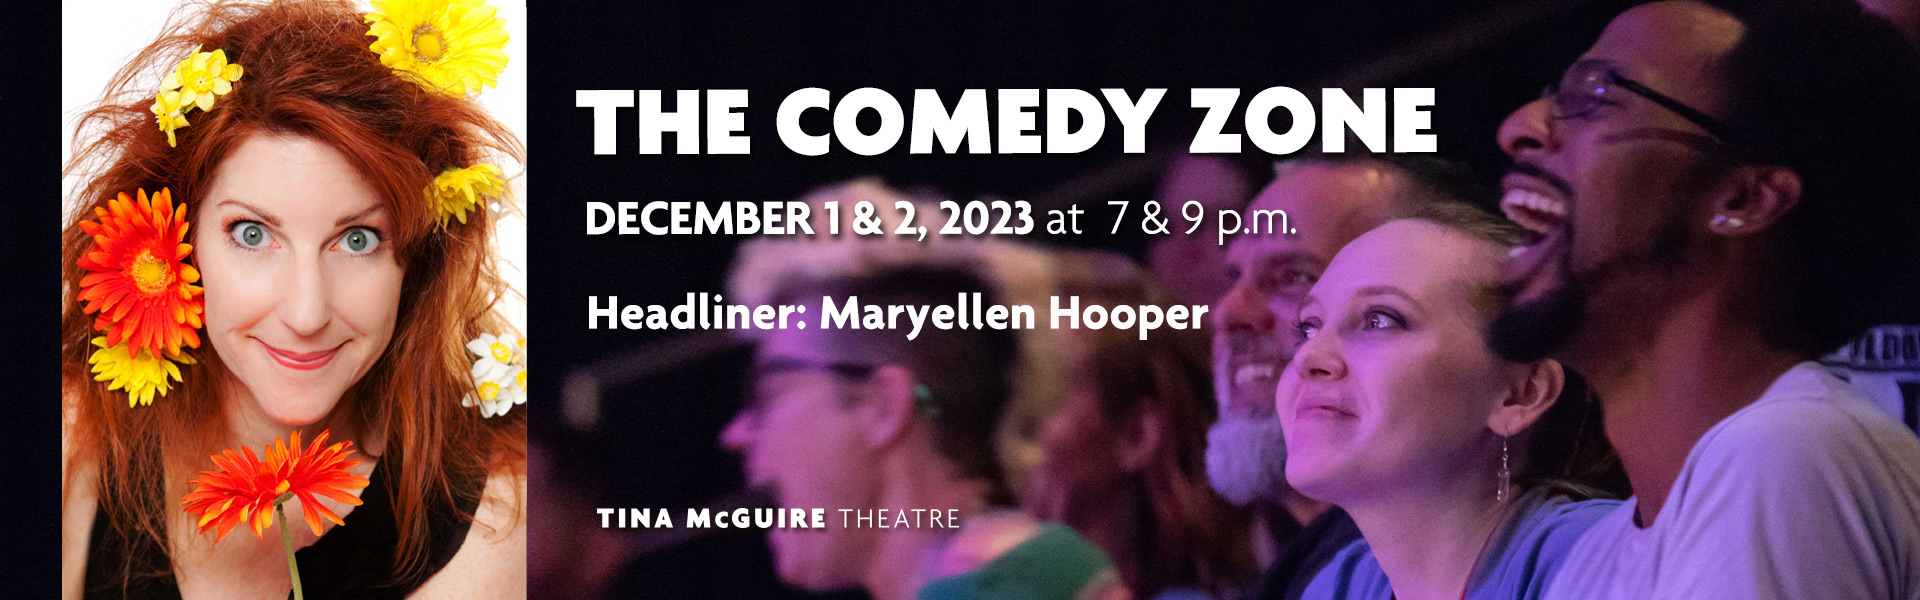 The Comedy Zone with Maryellen Hooper, December 1 & 2 at 7 & 9 PM